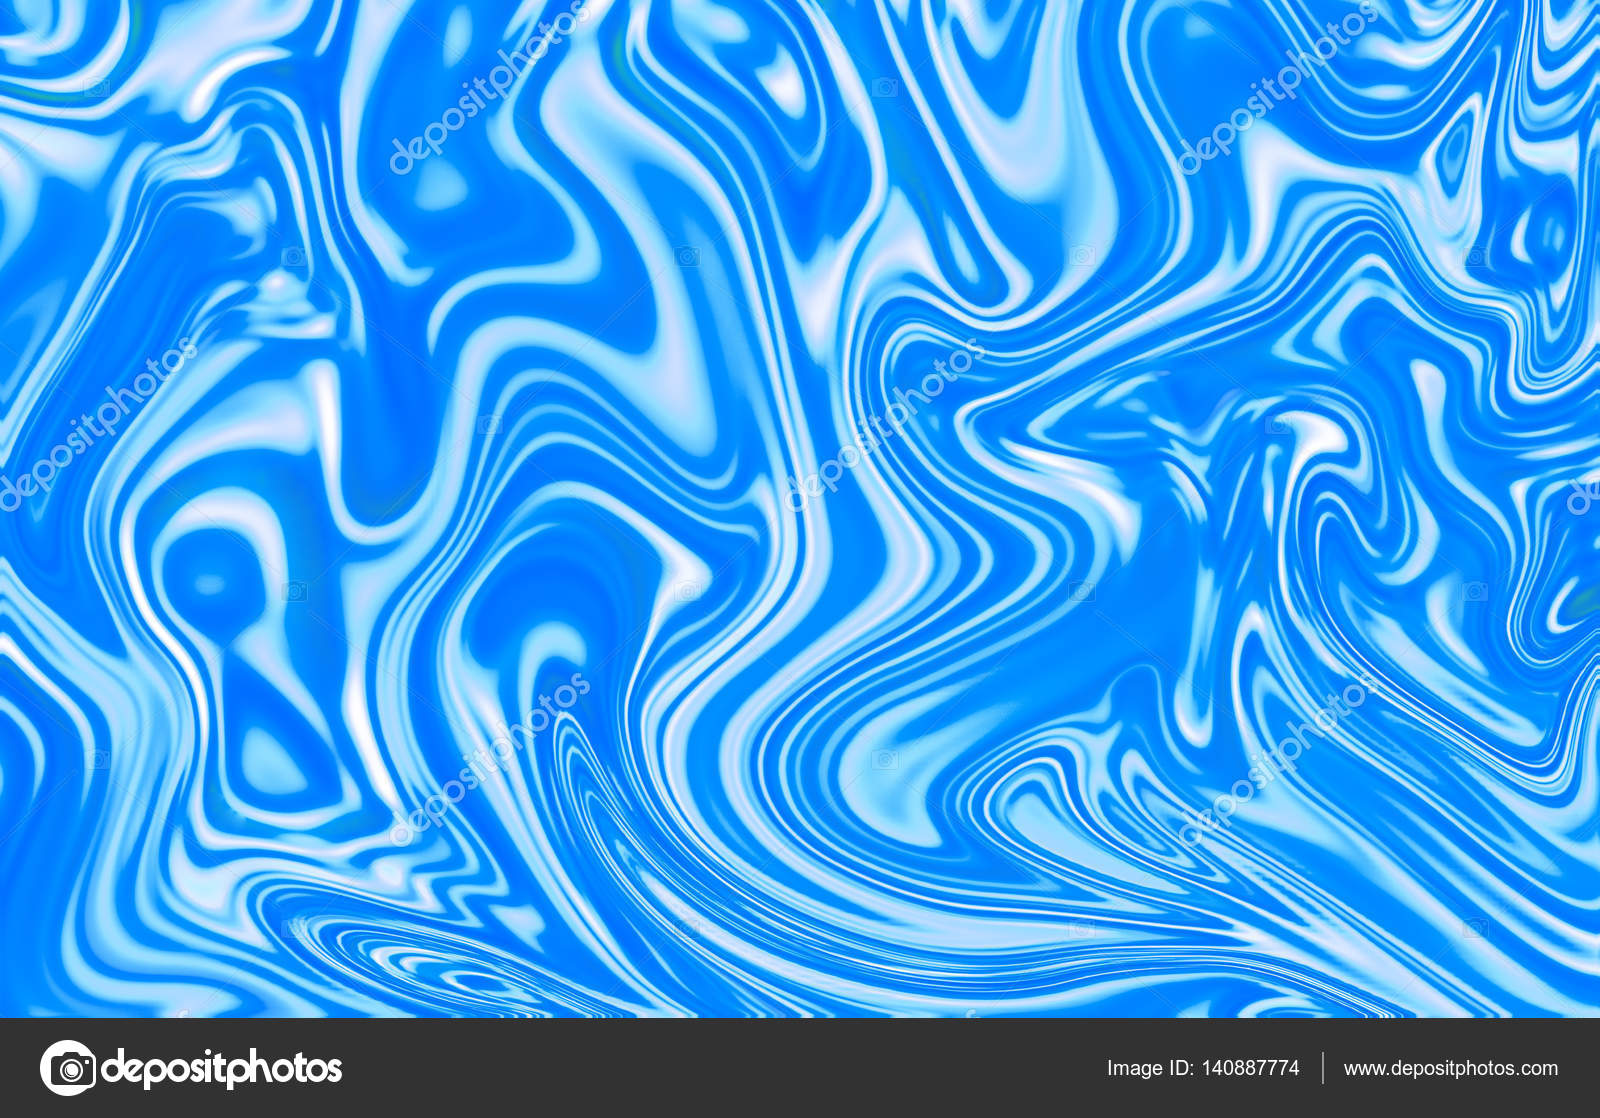 Liquid Marble Wallpaper Marble Abstract Background Blue Liquid Surface Wallpaper Agate Stone Ornament With Light Blue And White Paint Stock Photo C Davdeka